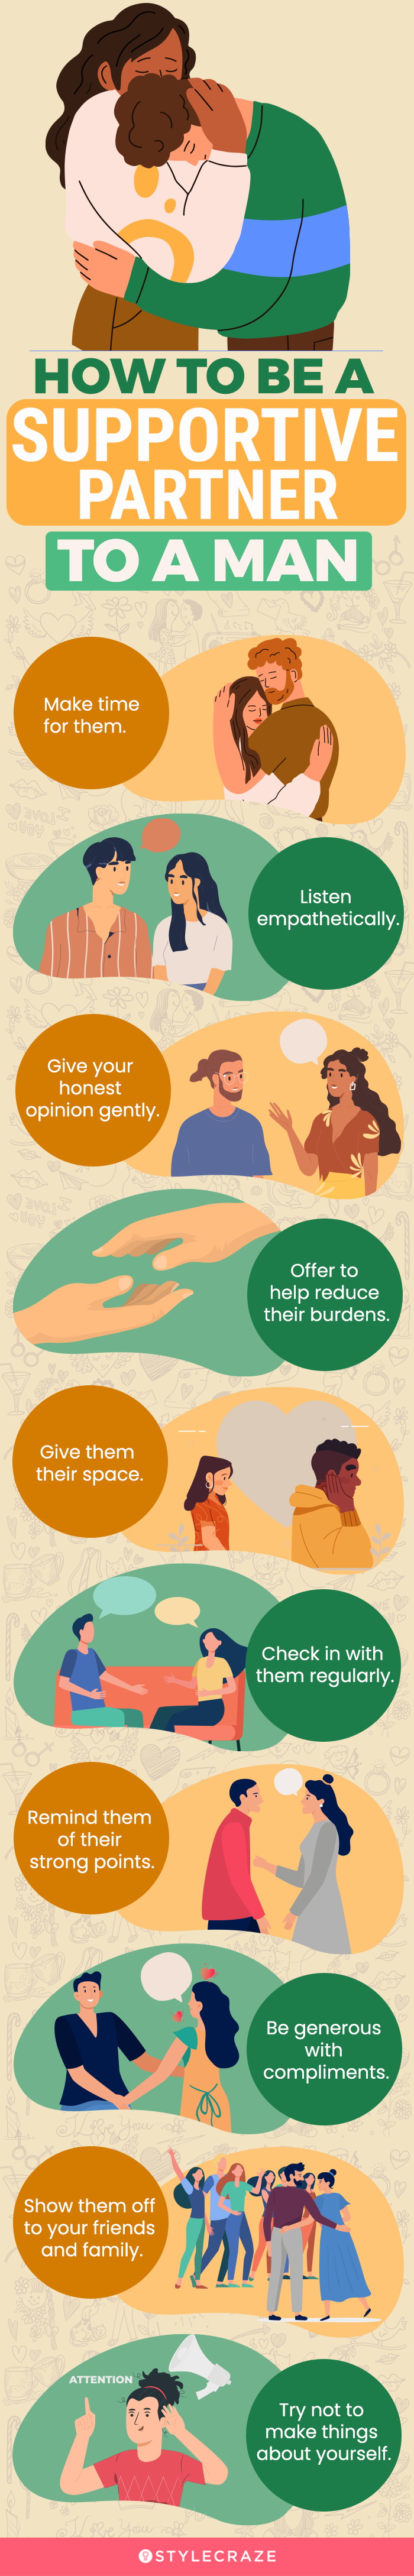 how to be a supportive partner to a man [infographic]